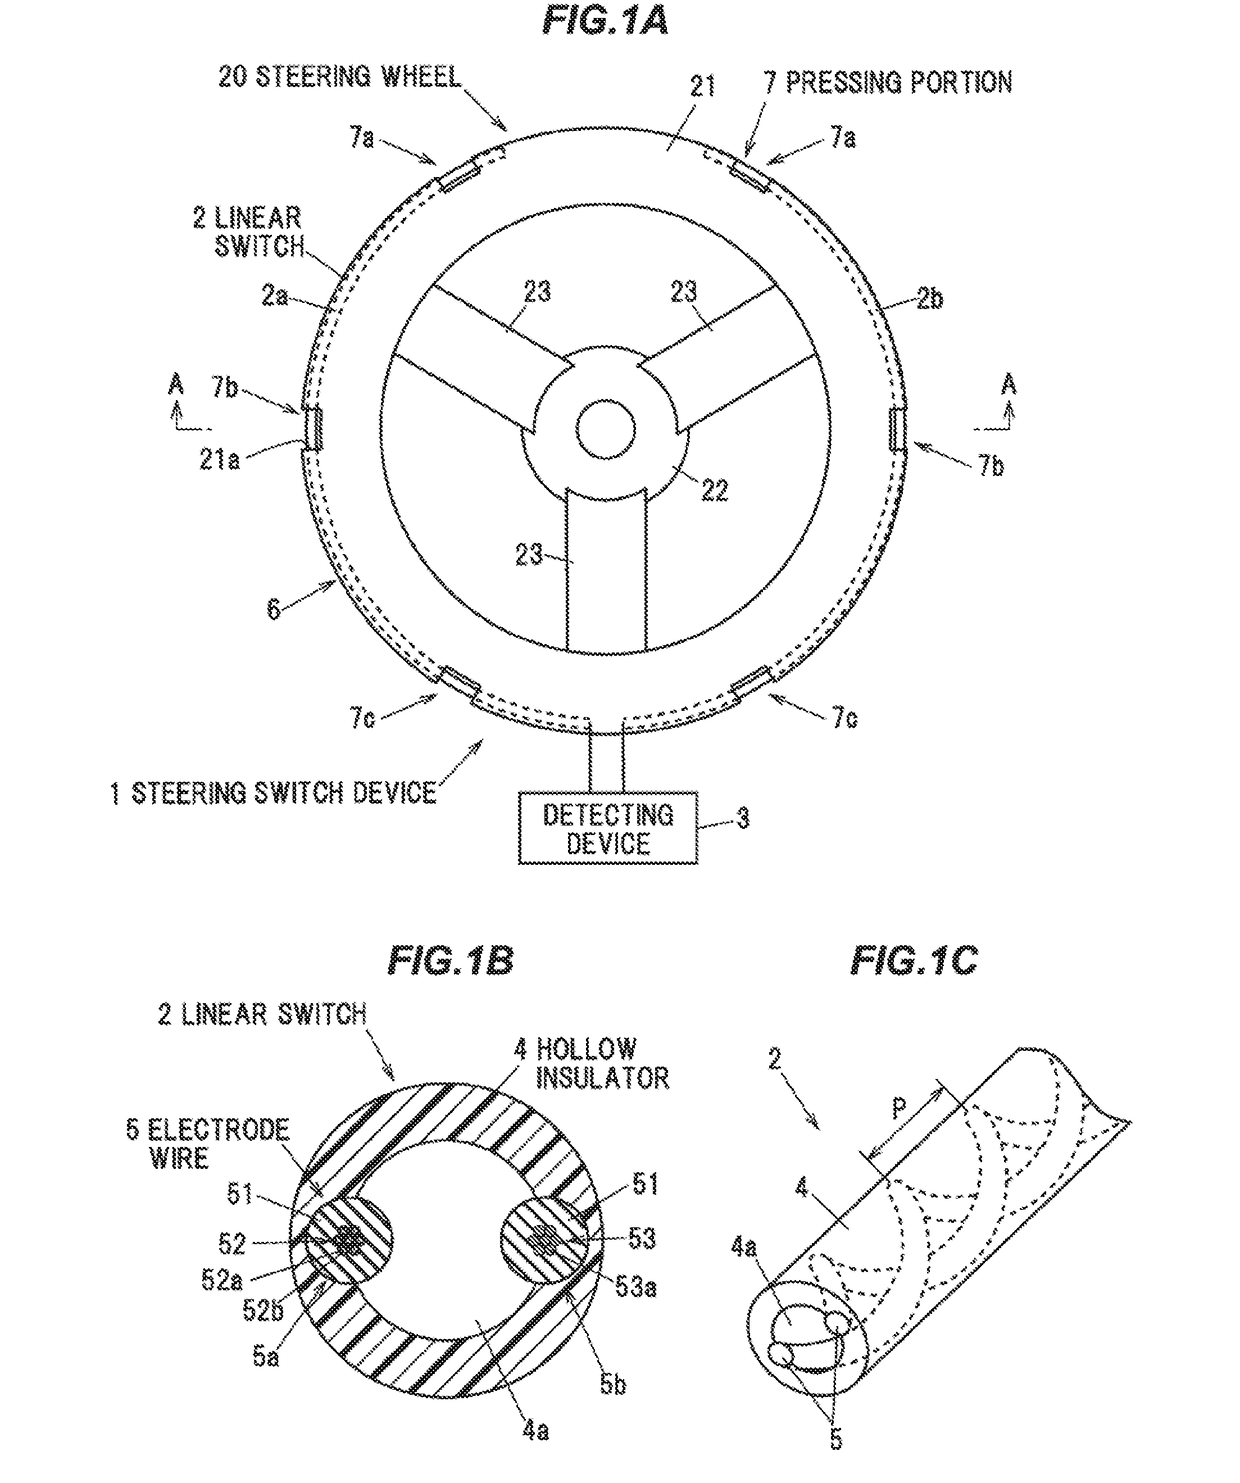 Steering switch device and steering wheel